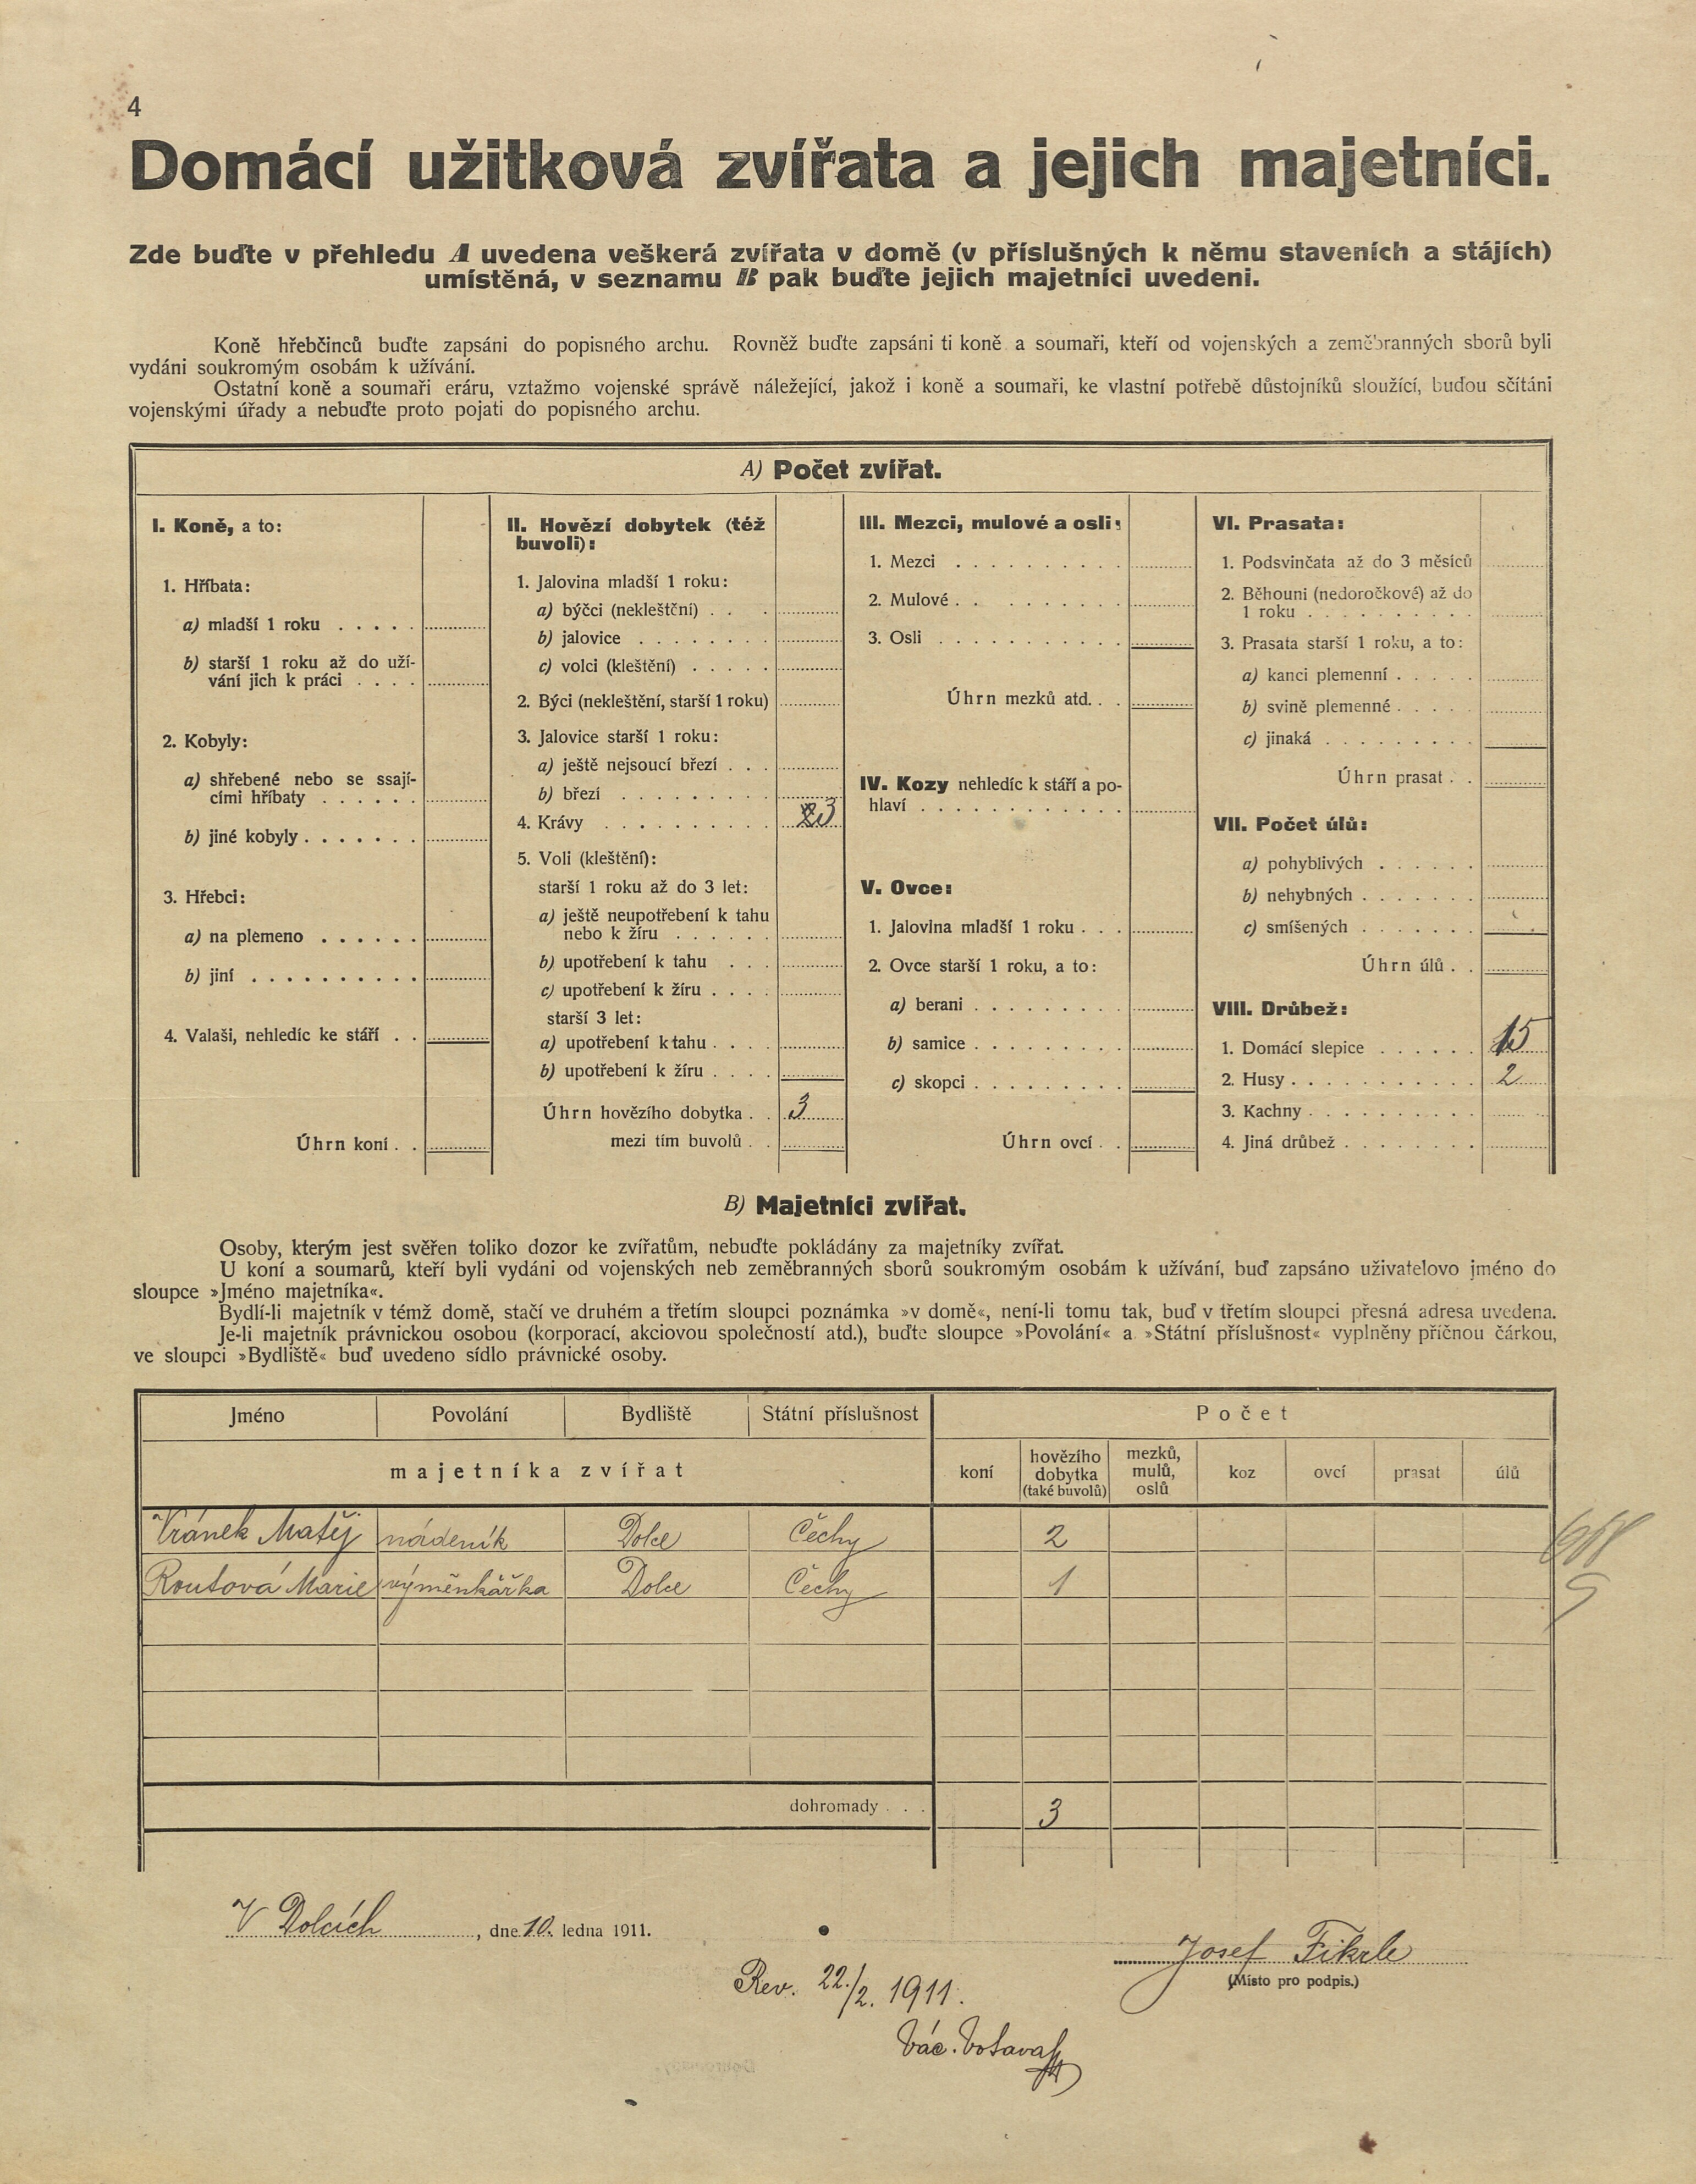 5. soap-pj_00302_census-1910-dolce-cp051_0050